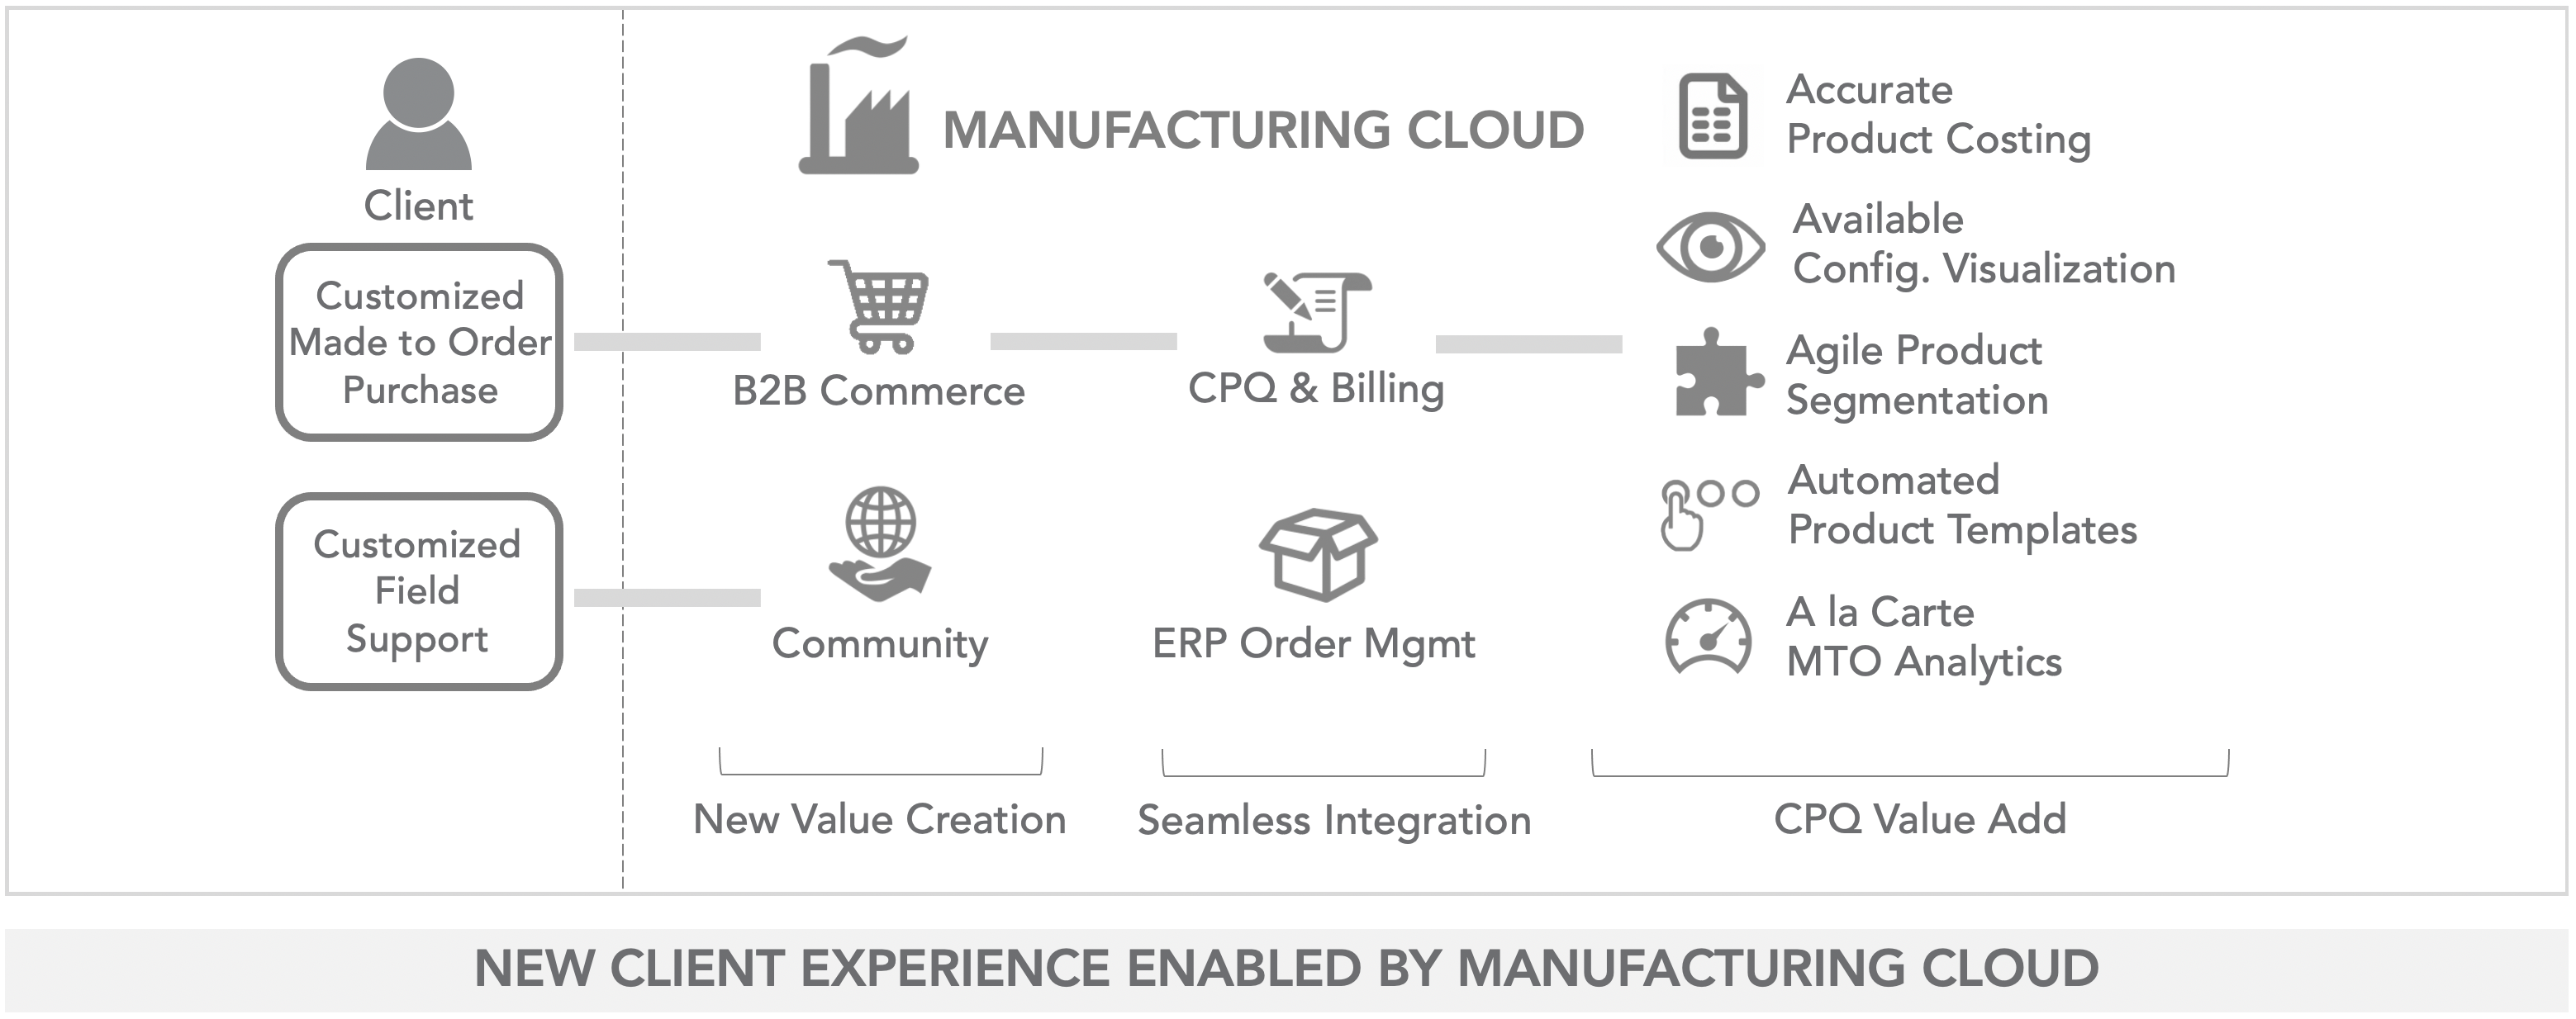 New Client Experience Enabled by Manufacturing Cloud